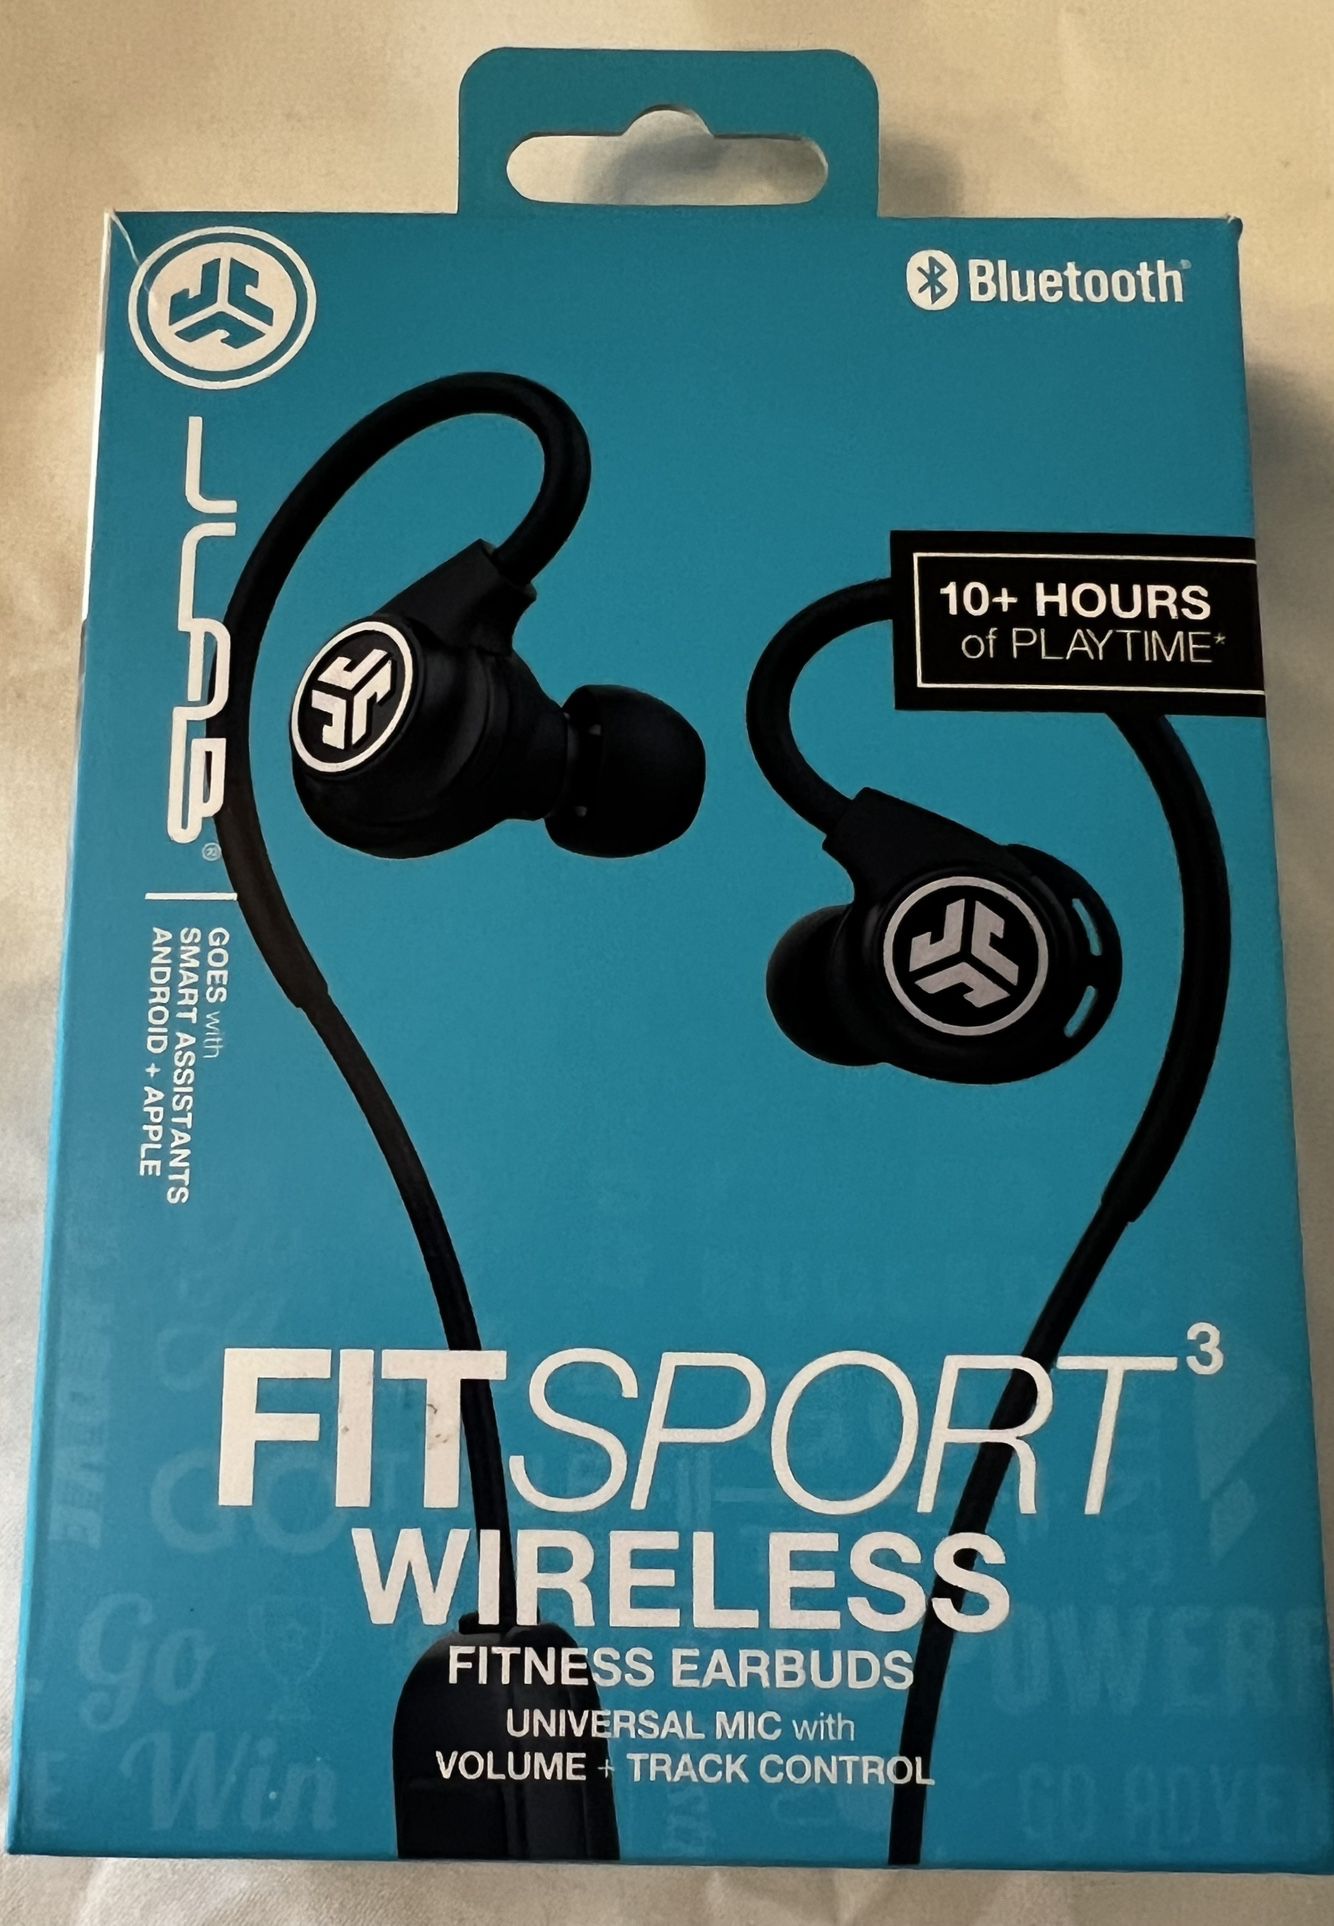 JLab Fit Sport 3 Wireless Fitness Gym Earbuds, Bluetooth 4.2, 6 Hour Battery Life, Flexible Memory Wir